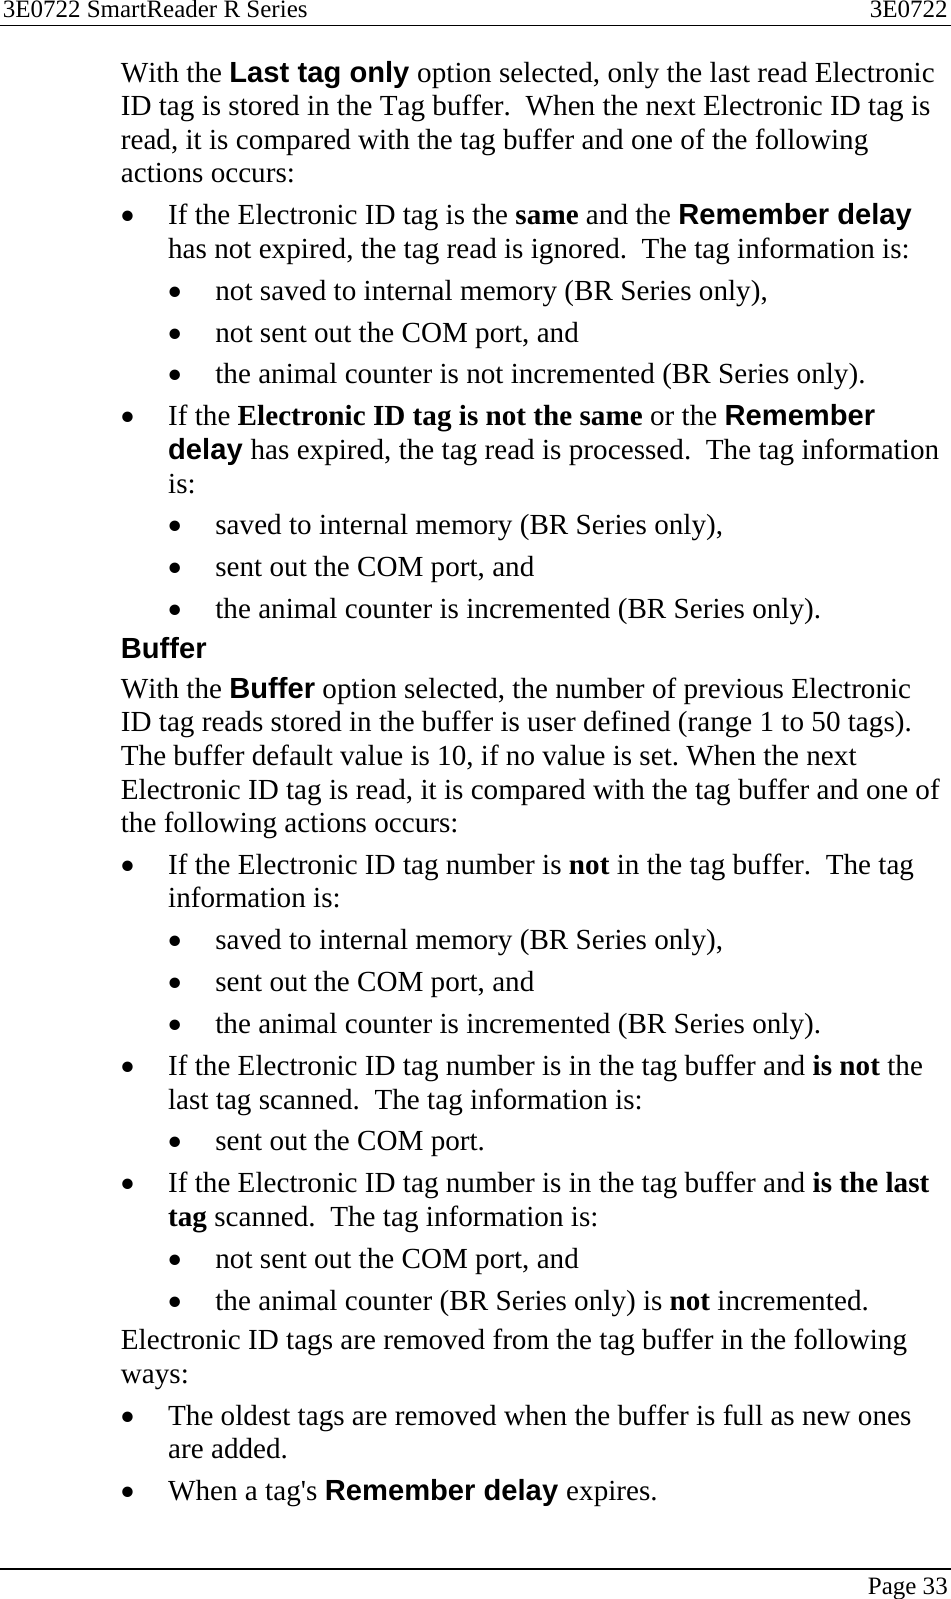 3E0722 SmartReader R Series  3E0722   Page 33  With the Last tag only option selected, only the last read Electronic ID tag is stored in the Tag buffer.  When the next Electronic ID tag is read, it is compared with the tag buffer and one of the following actions occurs: • If the Electronic ID tag is the same and the Remember delay has not expired, the tag read is ignored.  The tag information is: • not saved to internal memory (BR Series only),  • not sent out the COM port, and  • the animal counter is not incremented (BR Series only). • If the Electronic ID tag is not the same or the Remember delay has expired, the tag read is processed.  The tag information is: • saved to internal memory (BR Series only),  • sent out the COM port, and  • the animal counter is incremented (BR Series only). Buffer With the Buffer option selected, the number of previous Electronic ID tag reads stored in the buffer is user defined (range 1 to 50 tags). The buffer default value is 10, if no value is set. When the next Electronic ID tag is read, it is compared with the tag buffer and one of the following actions occurs: • If the Electronic ID tag number is not in the tag buffer.  The tag information is: • saved to internal memory (BR Series only),  • sent out the COM port, and  • the animal counter is incremented (BR Series only). • If the Electronic ID tag number is in the tag buffer and is not the last tag scanned.  The tag information is: • sent out the COM port. • If the Electronic ID tag number is in the tag buffer and is the last tag scanned.  The tag information is: • not sent out the COM port, and  • the animal counter (BR Series only) is not incremented. Electronic ID tags are removed from the tag buffer in the following ways: • The oldest tags are removed when the buffer is full as new ones are added. • When a tag&apos;s Remember delay expires. 